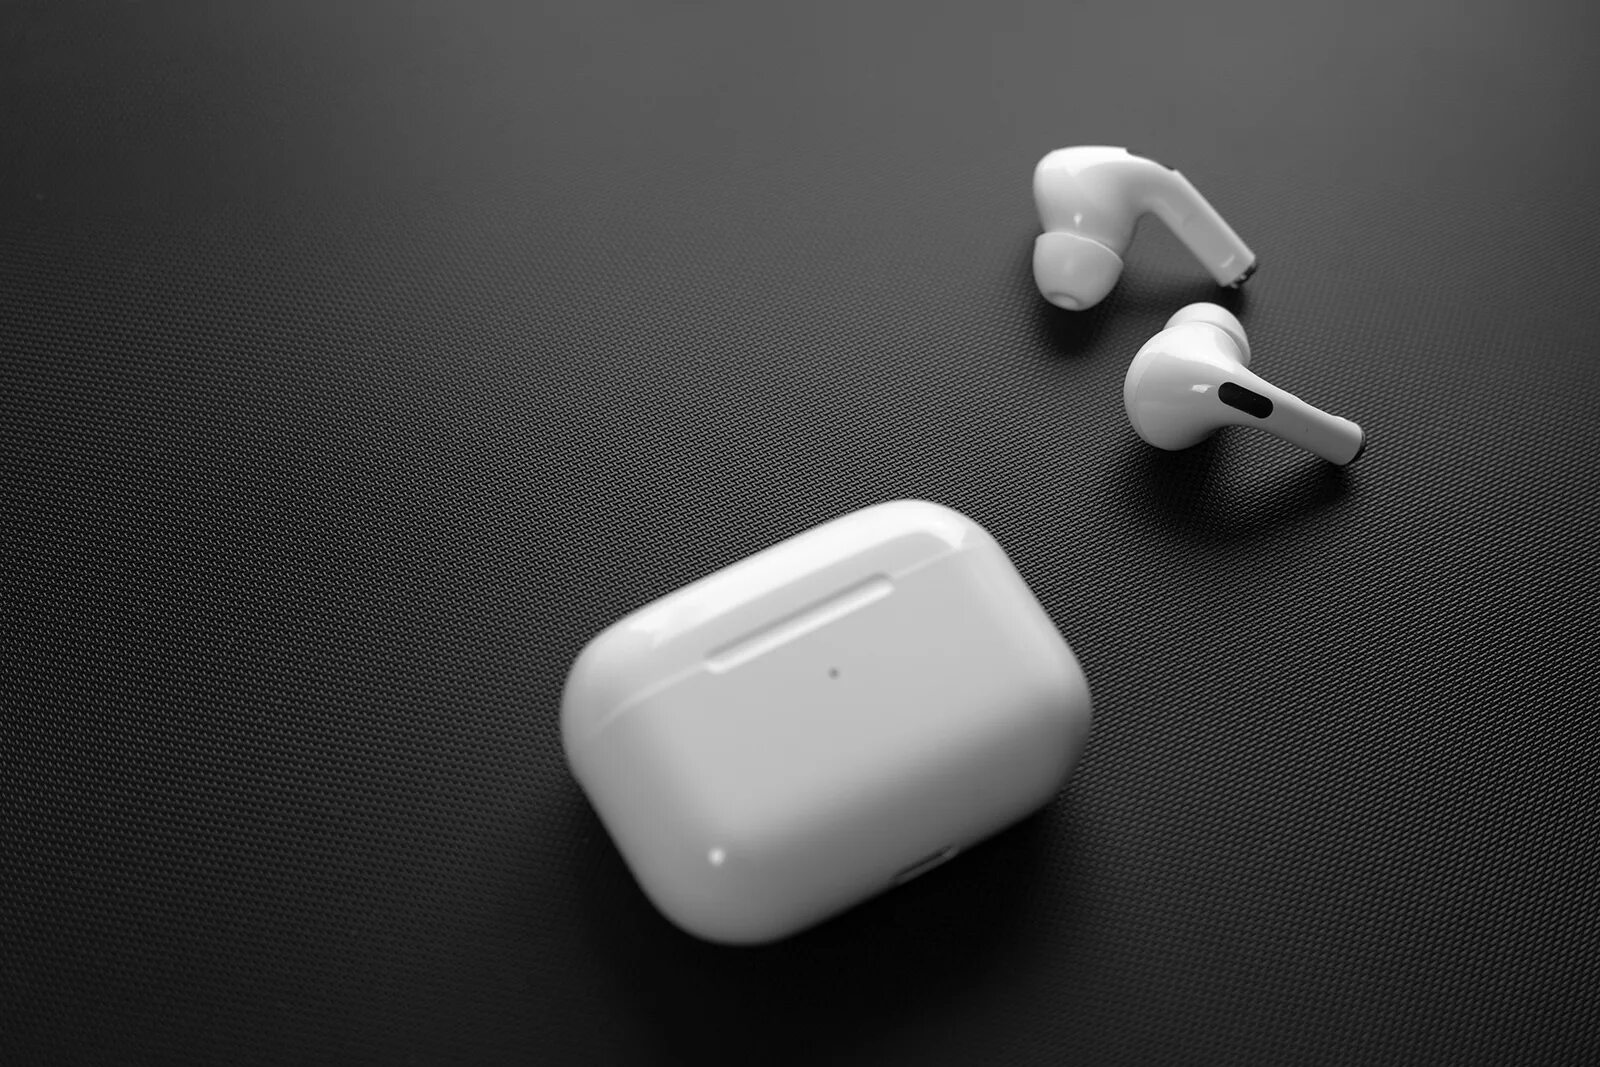 Airpods pods. Apple AIRPODS 2. Наушники Apple аирподс про 2. Apple AIRPODS 4. Apple AIRPODS 2.2.